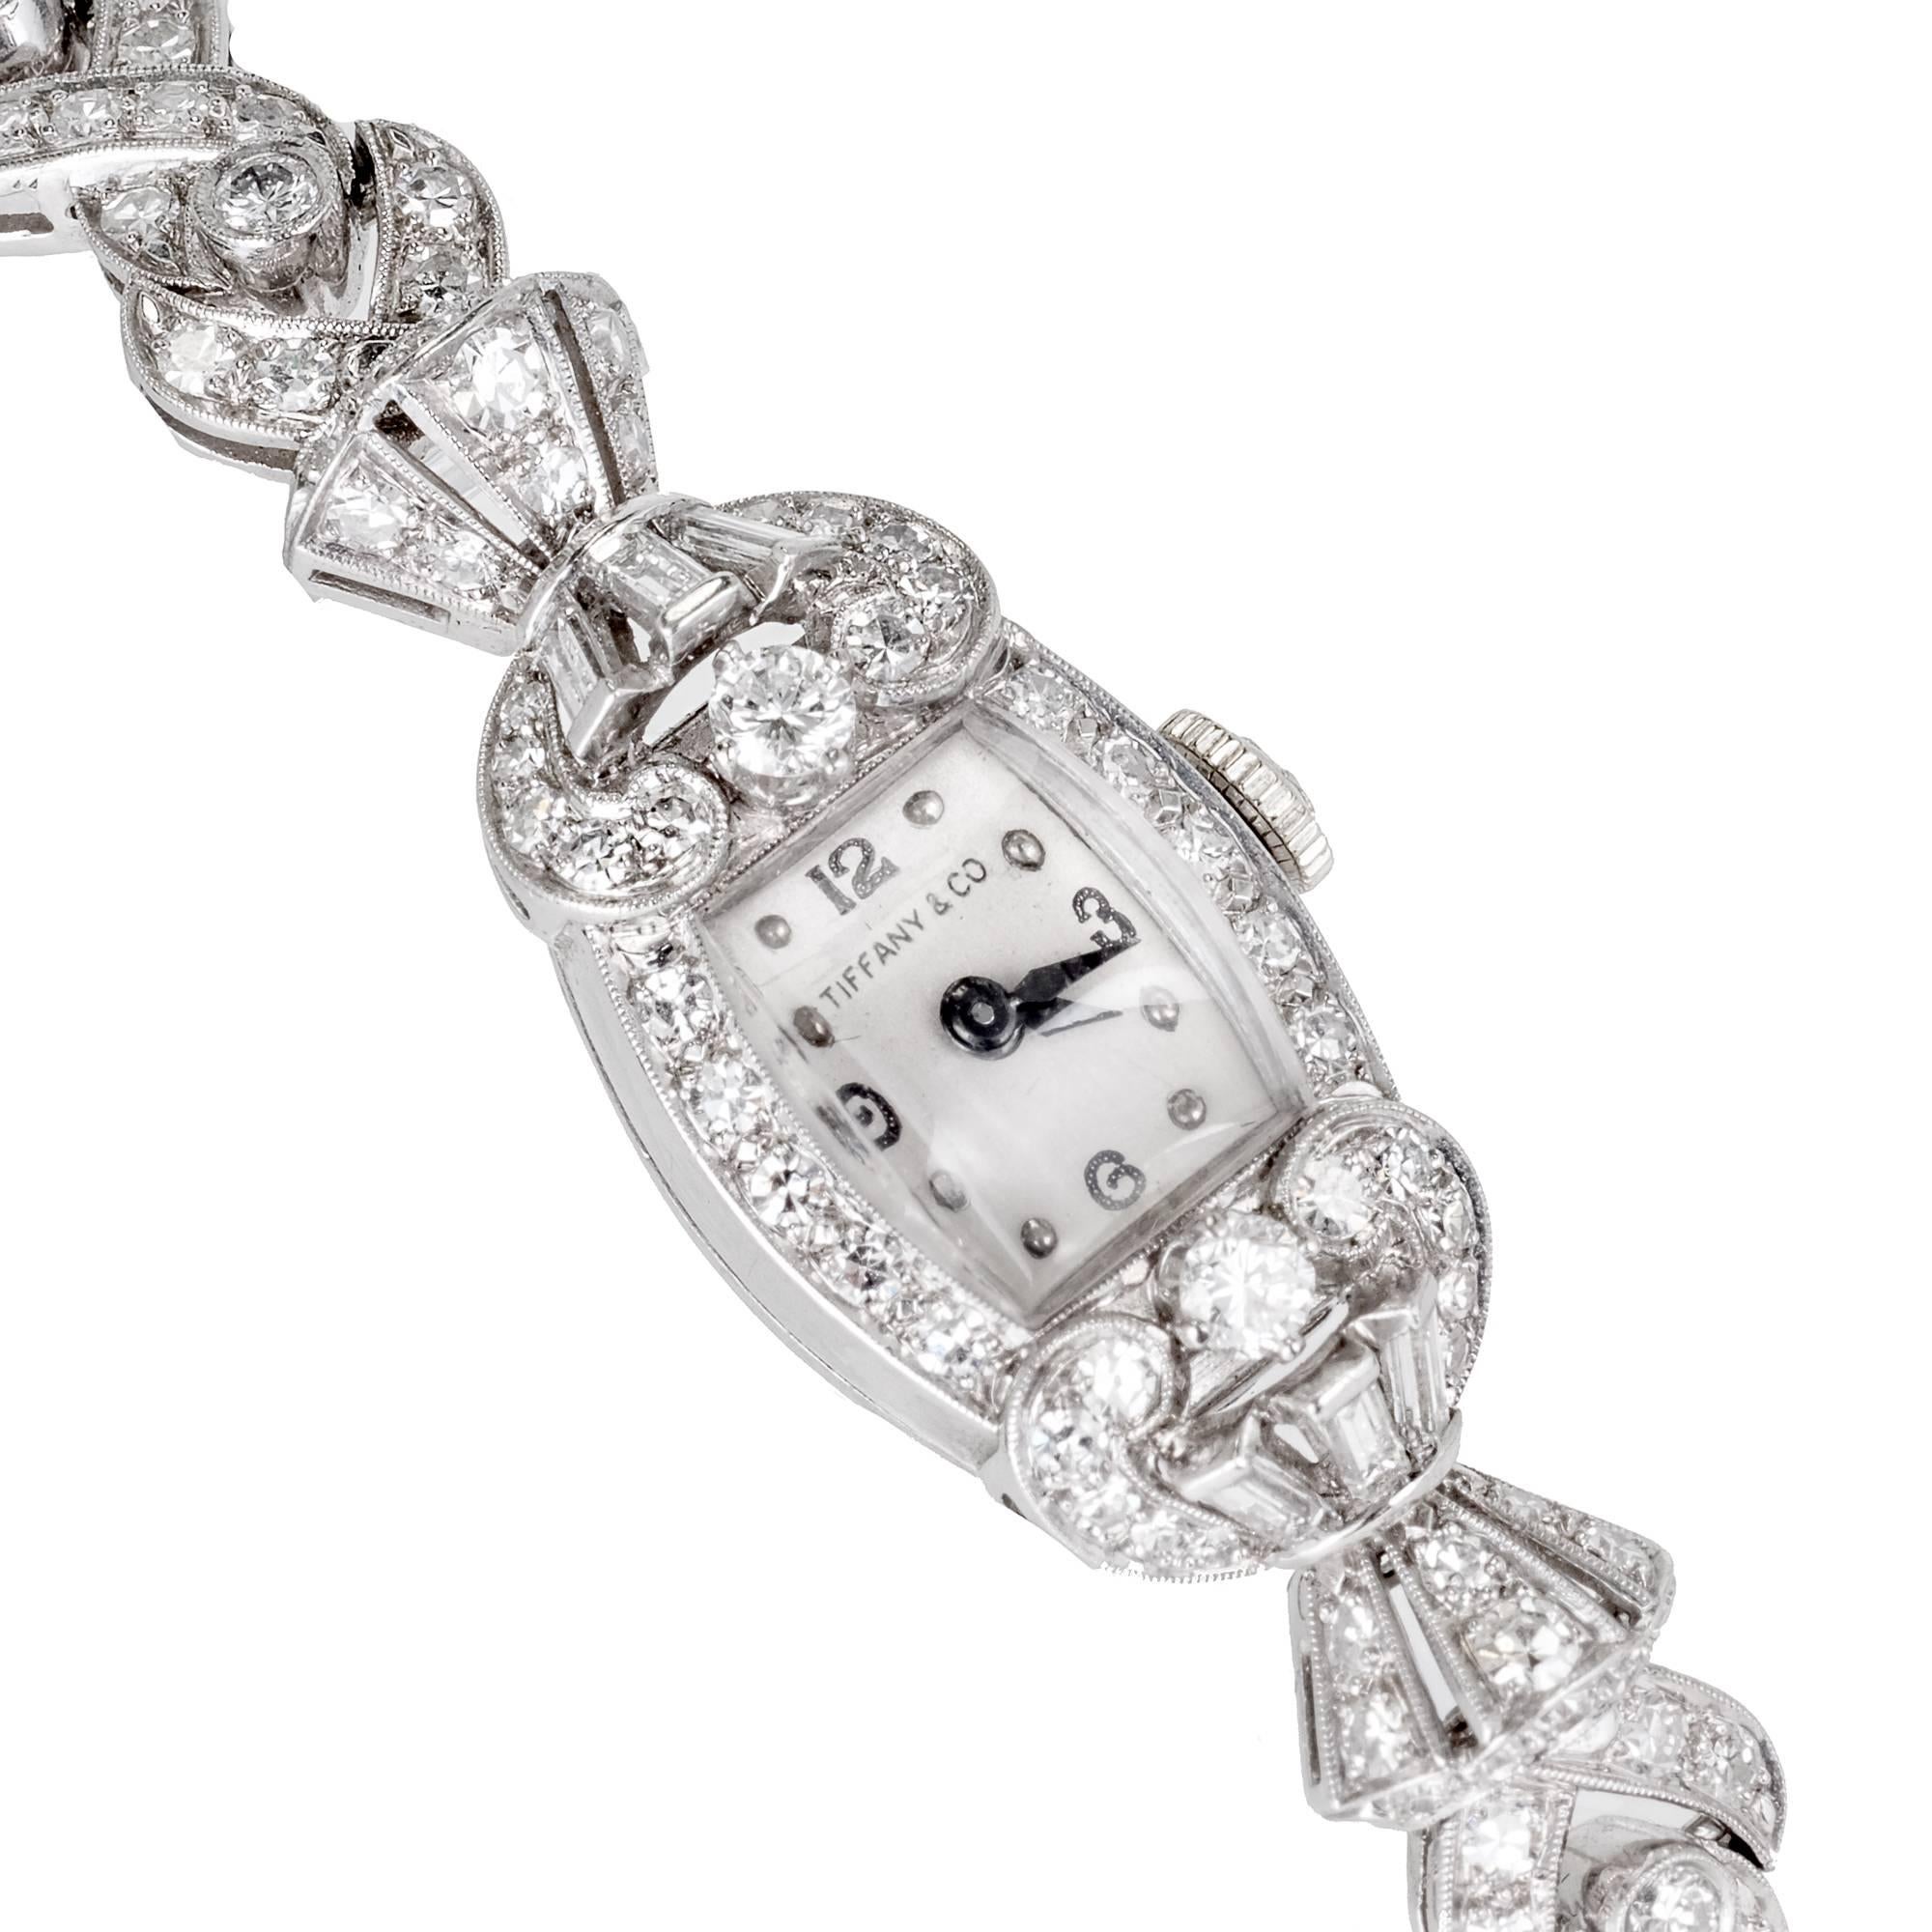 Hamilton lady's platinum and diamond bracelet wristwatch, circa 1940s. Round and baguette diamonds set in platinum. 

151 round diamonds 2.30cts, F to G color, VS. 
6 baguette cut diamonds 0.15cts, F, VS. 
12 round diamonds are full cut the rest are